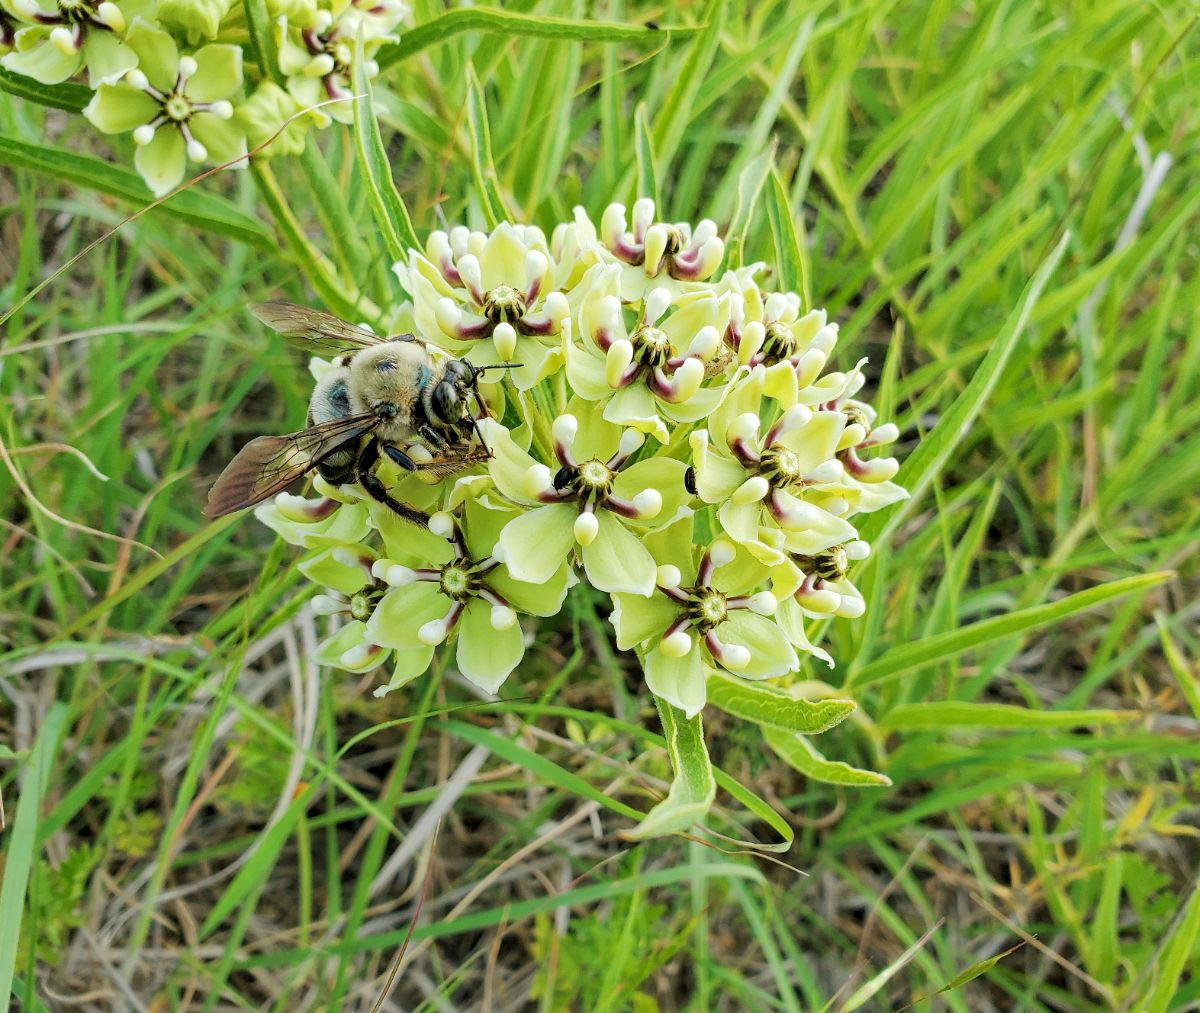 A bee on a green milkweed flower